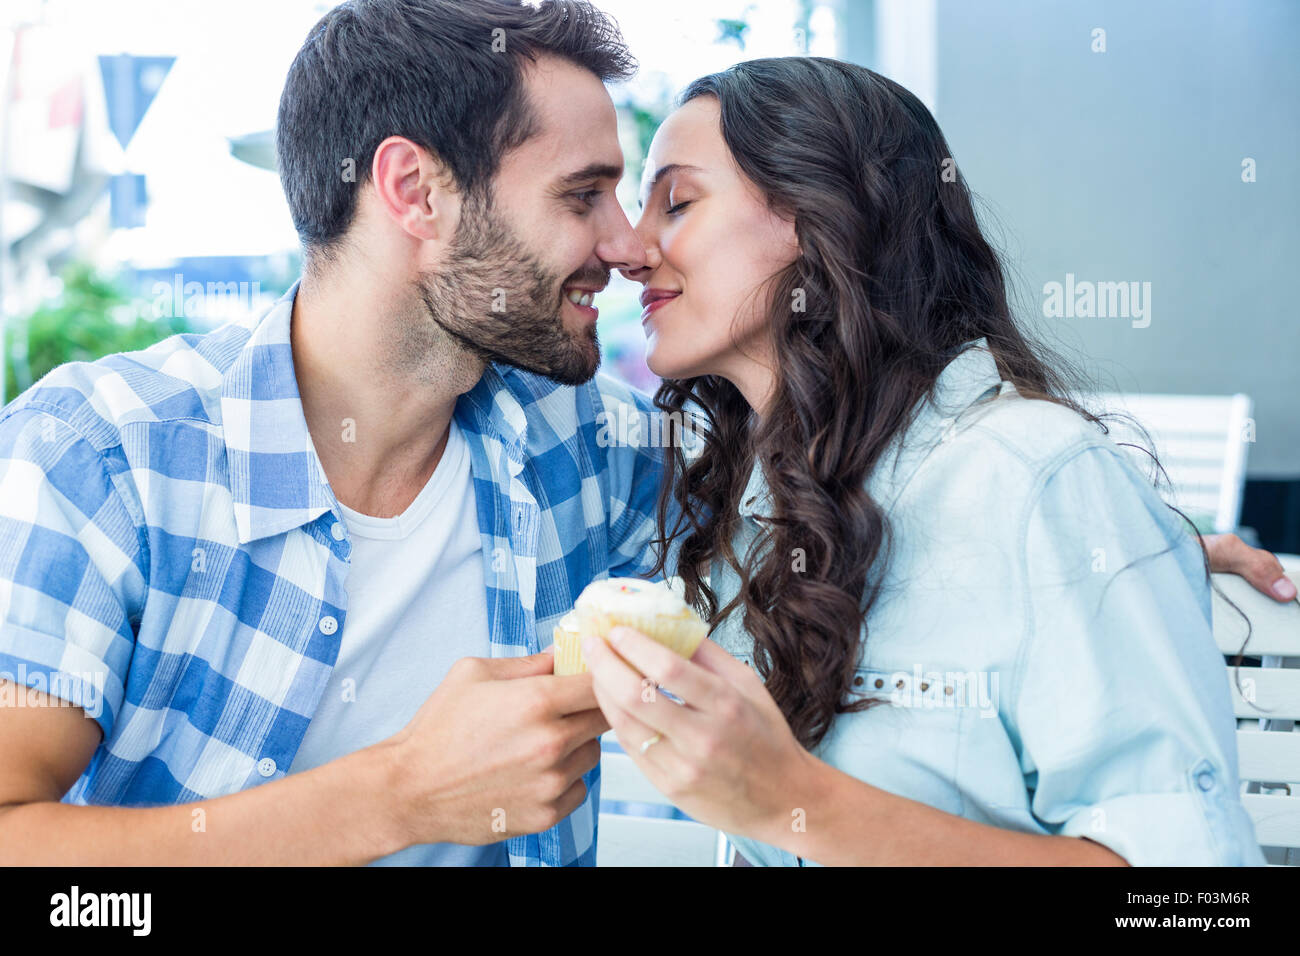 Couple kissing while holding cupcakes Stock Photo